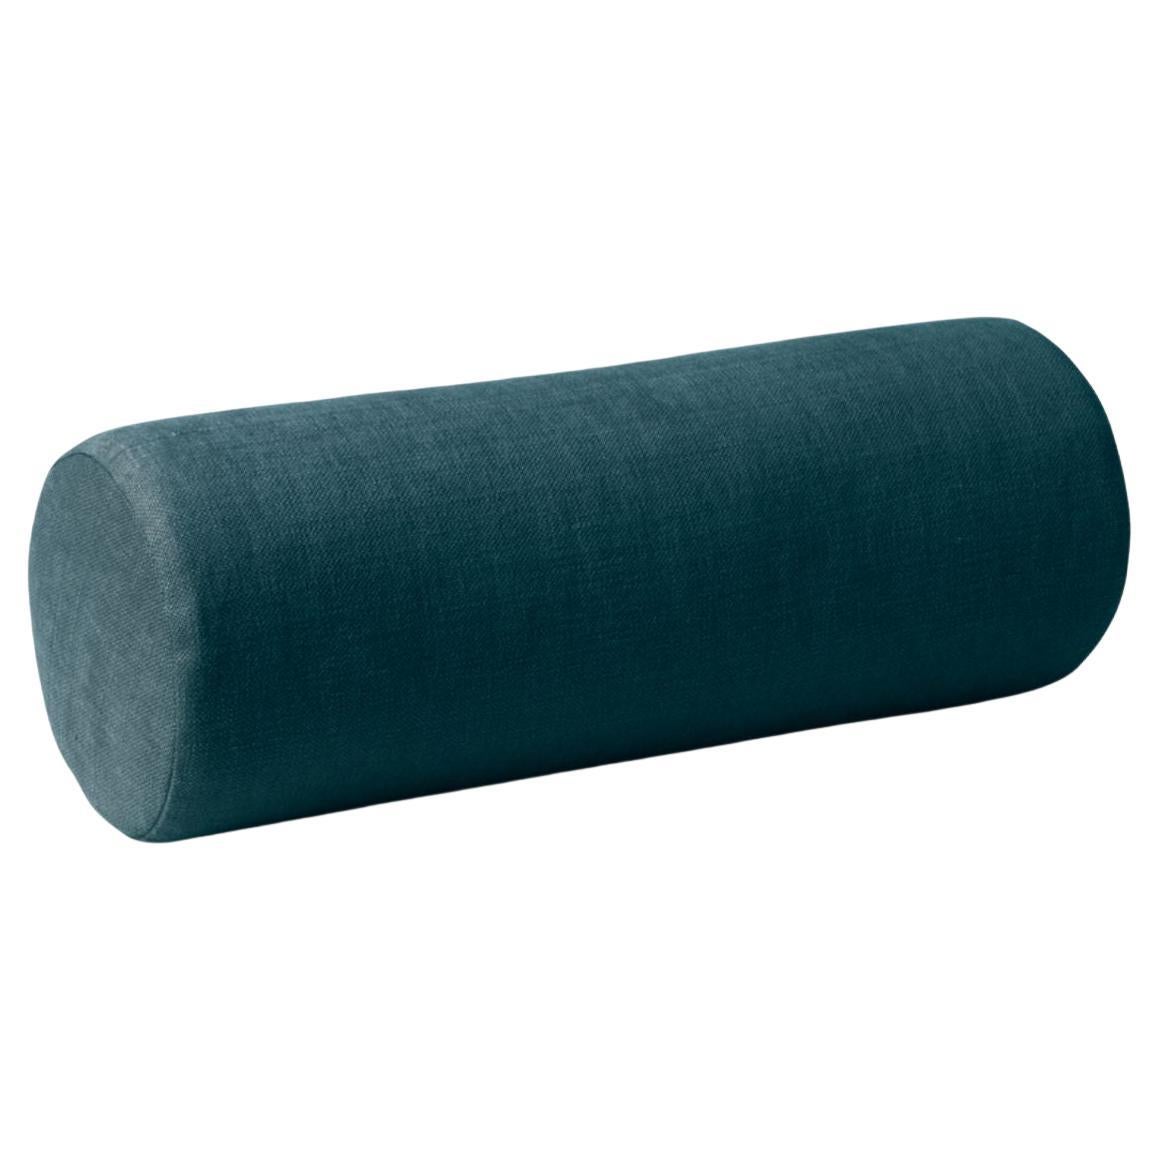 Galore Cushion Dark Teal by Warm Nordic For Sale